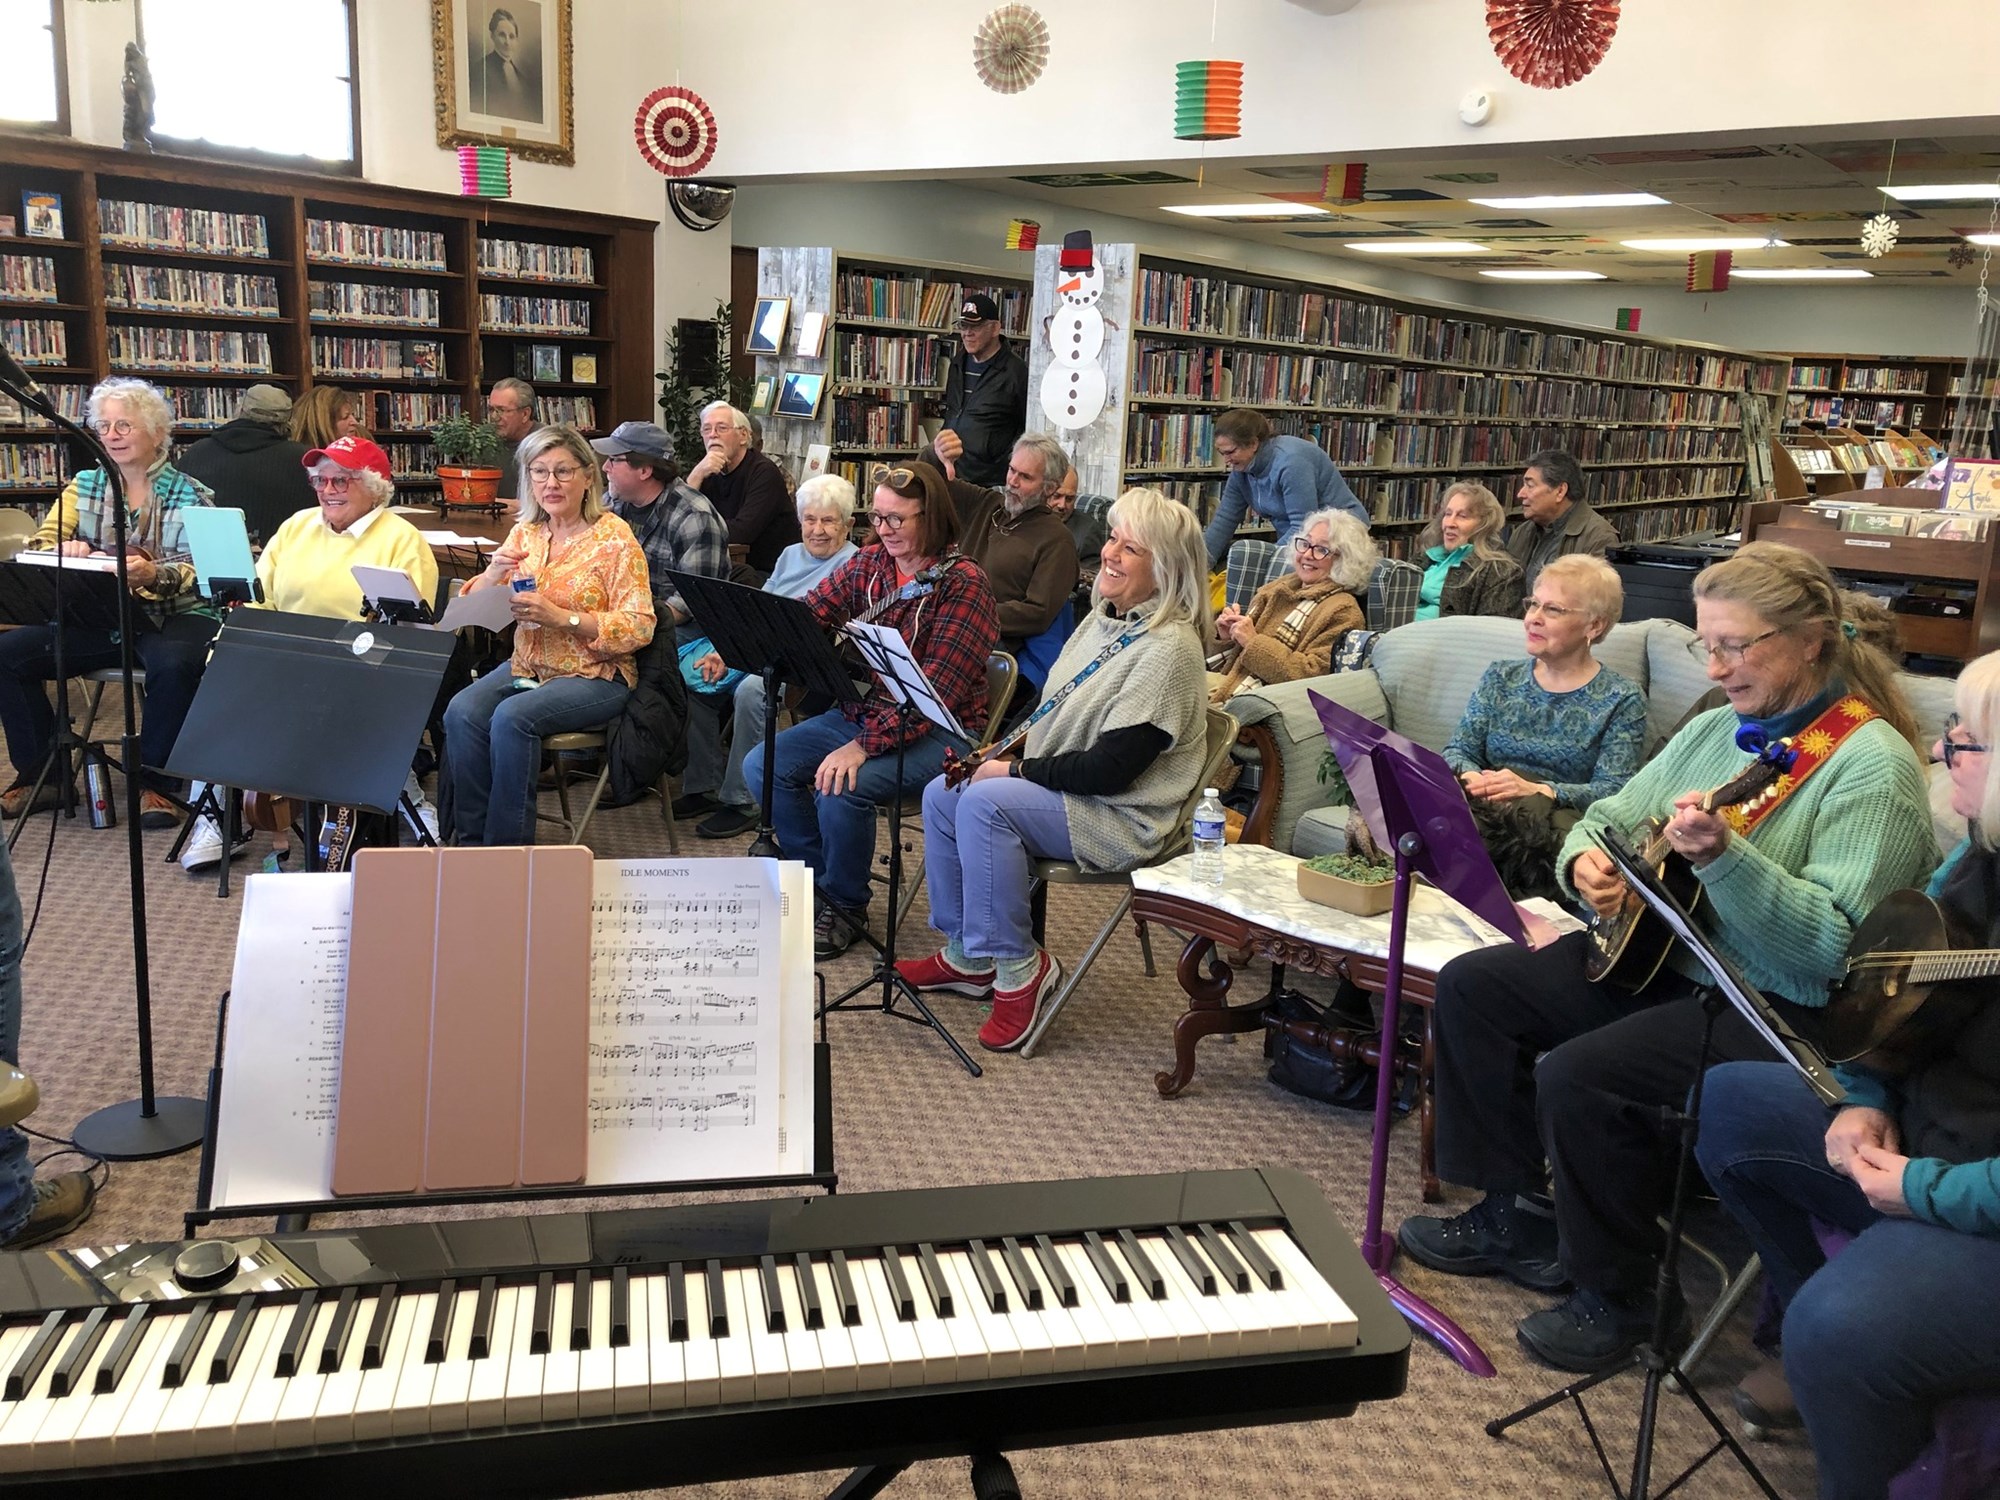 A large group of people sit in the main room of the Powers Memorial Library holding a variety of instruments, like guitars, ukuleles, drums. There are music stands in front of them and many look like they are singing. There is a keyboard in front of the group.